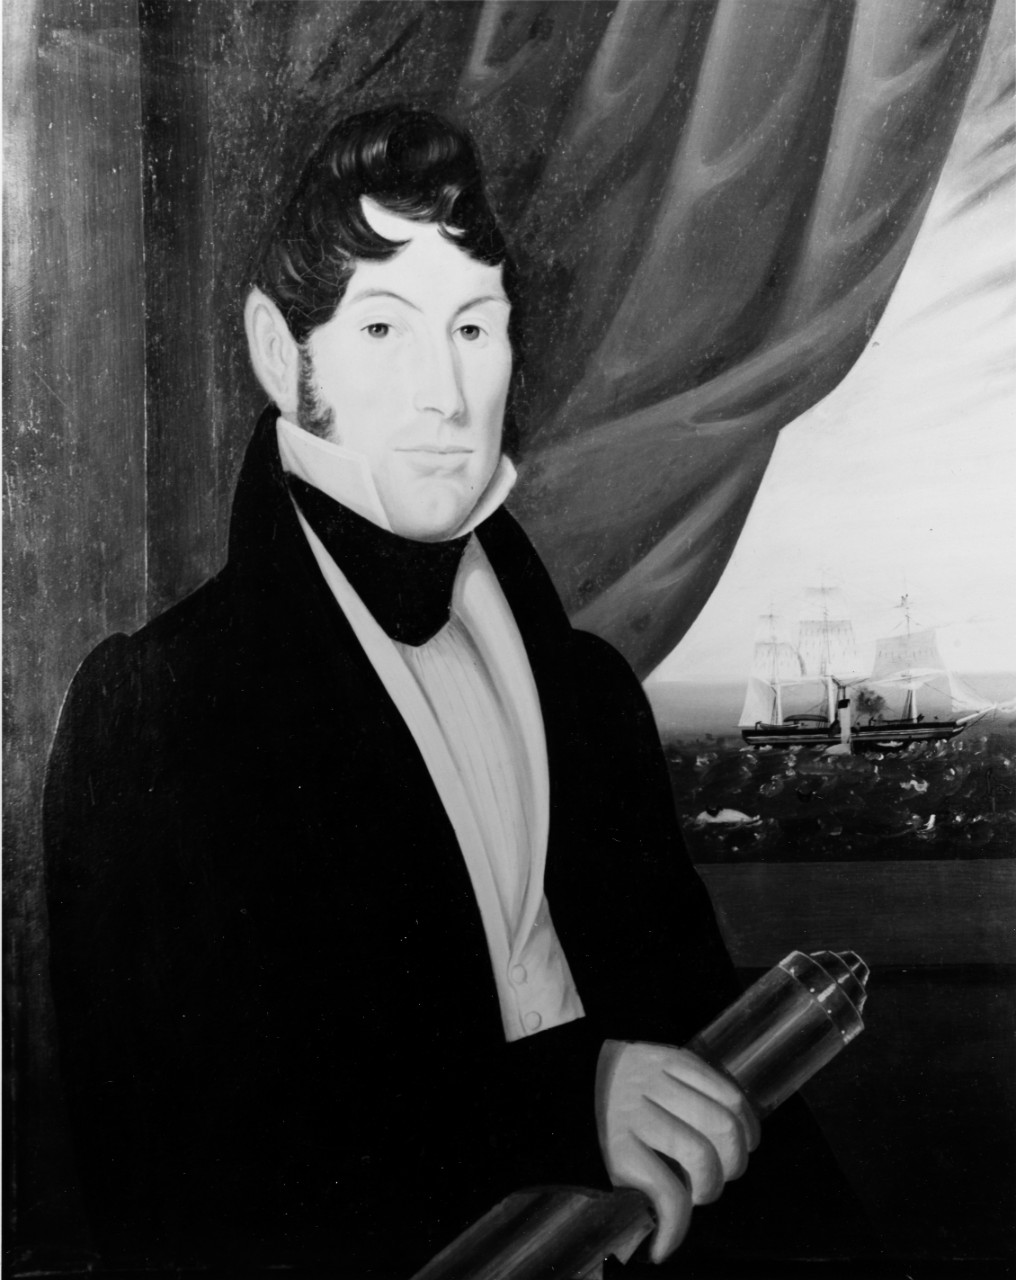 Whaling captain, 1850